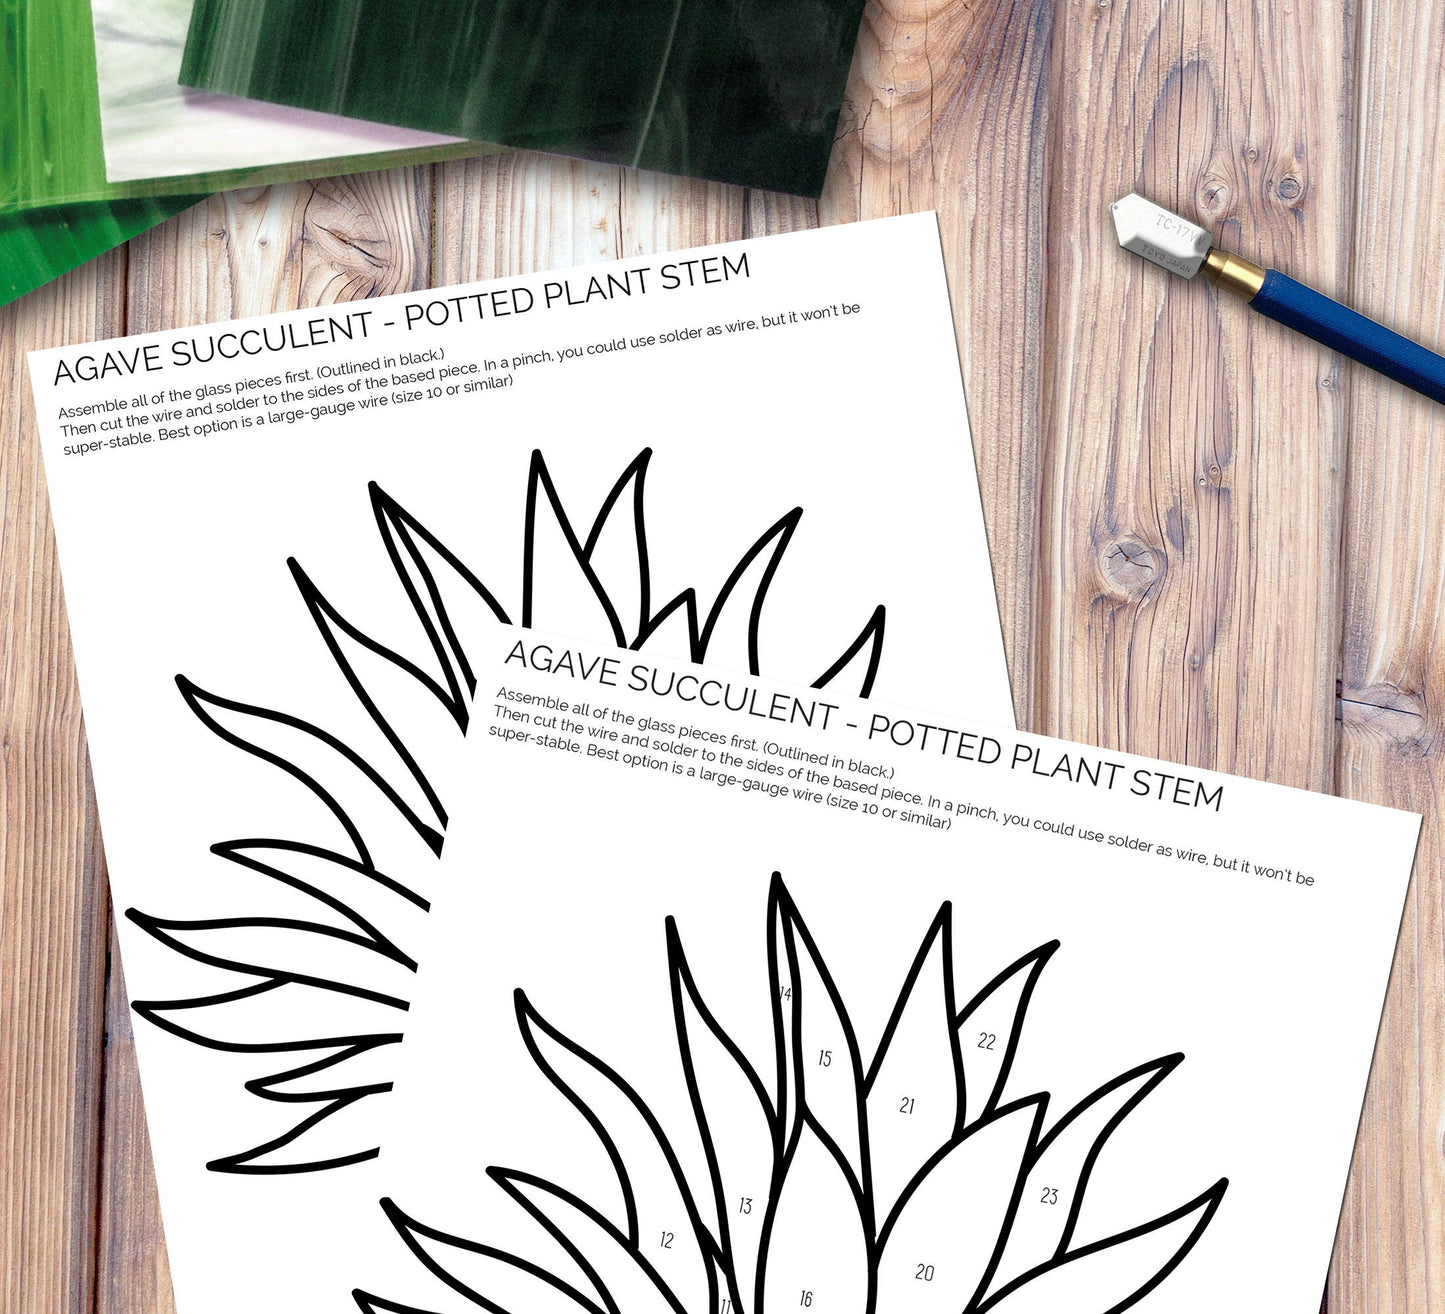 Sample of the clean and numbered stained glass patterns included with purchase of the agave plant stem download